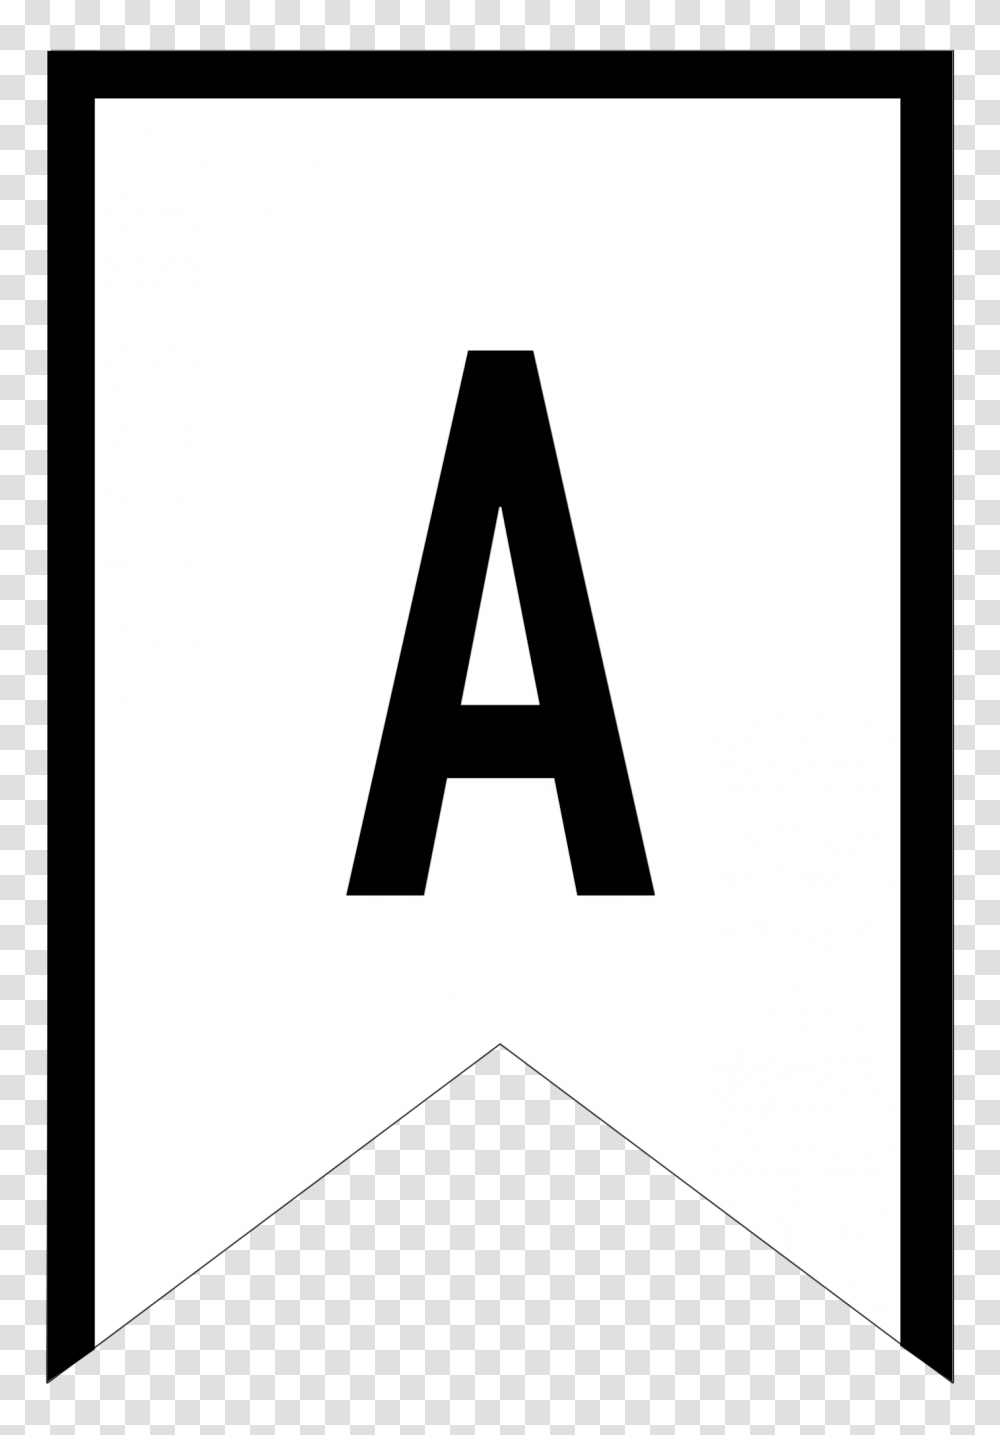 Banner Templates Free Printable Abc Letters, Label, Logo Intended For Free Letter Templates For Banners